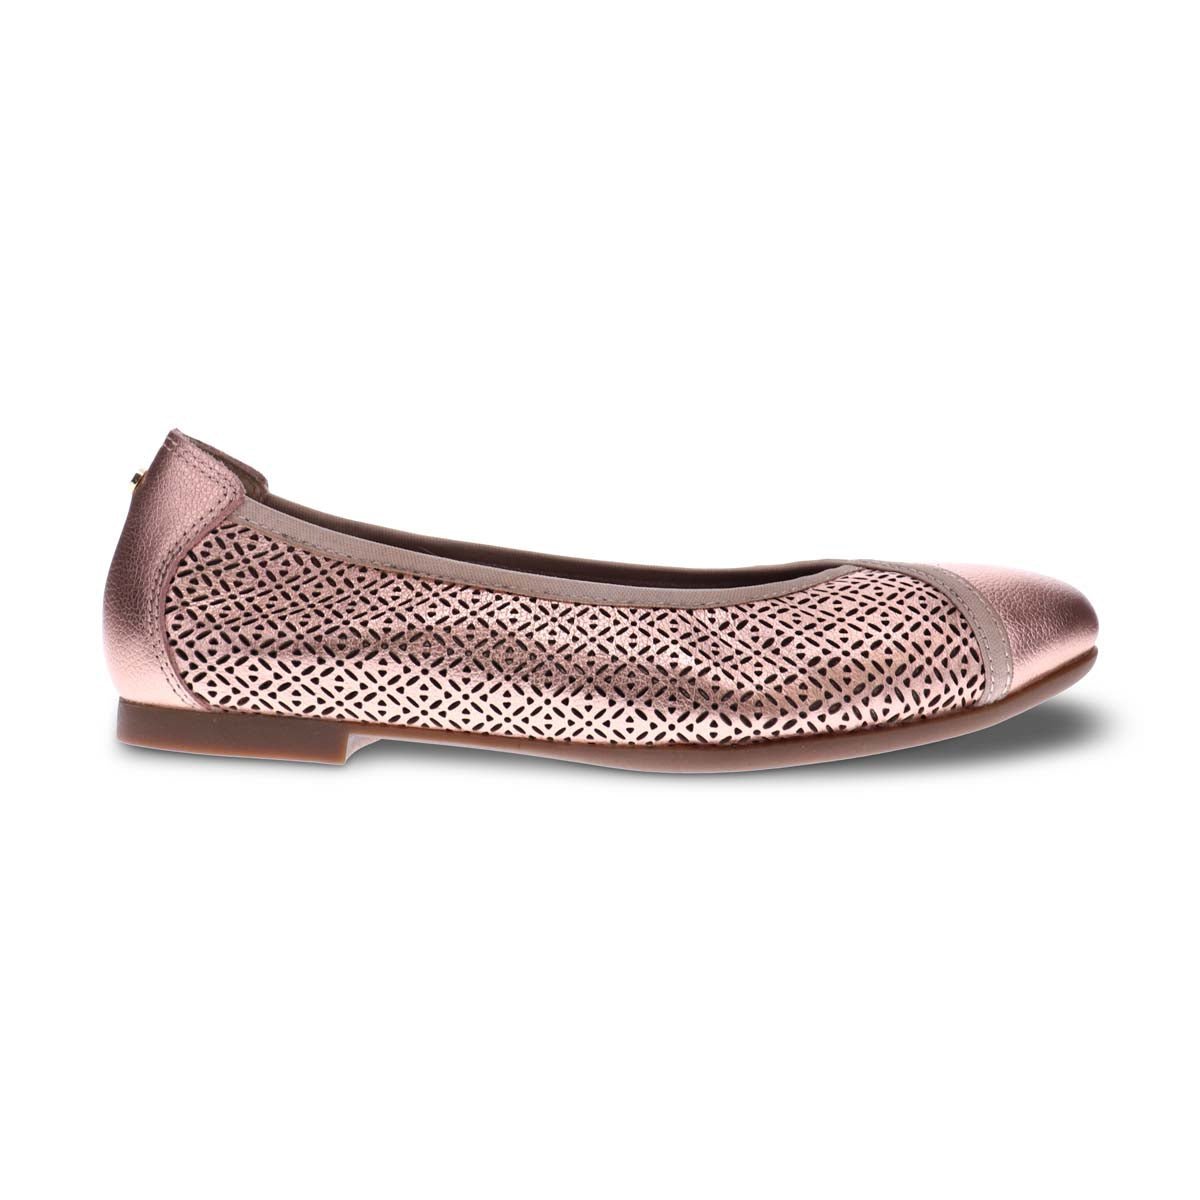 REVERE NAIROBI WOMEN SLIP-ON CASUAL SHOES IN ROSE - TLW Shoes